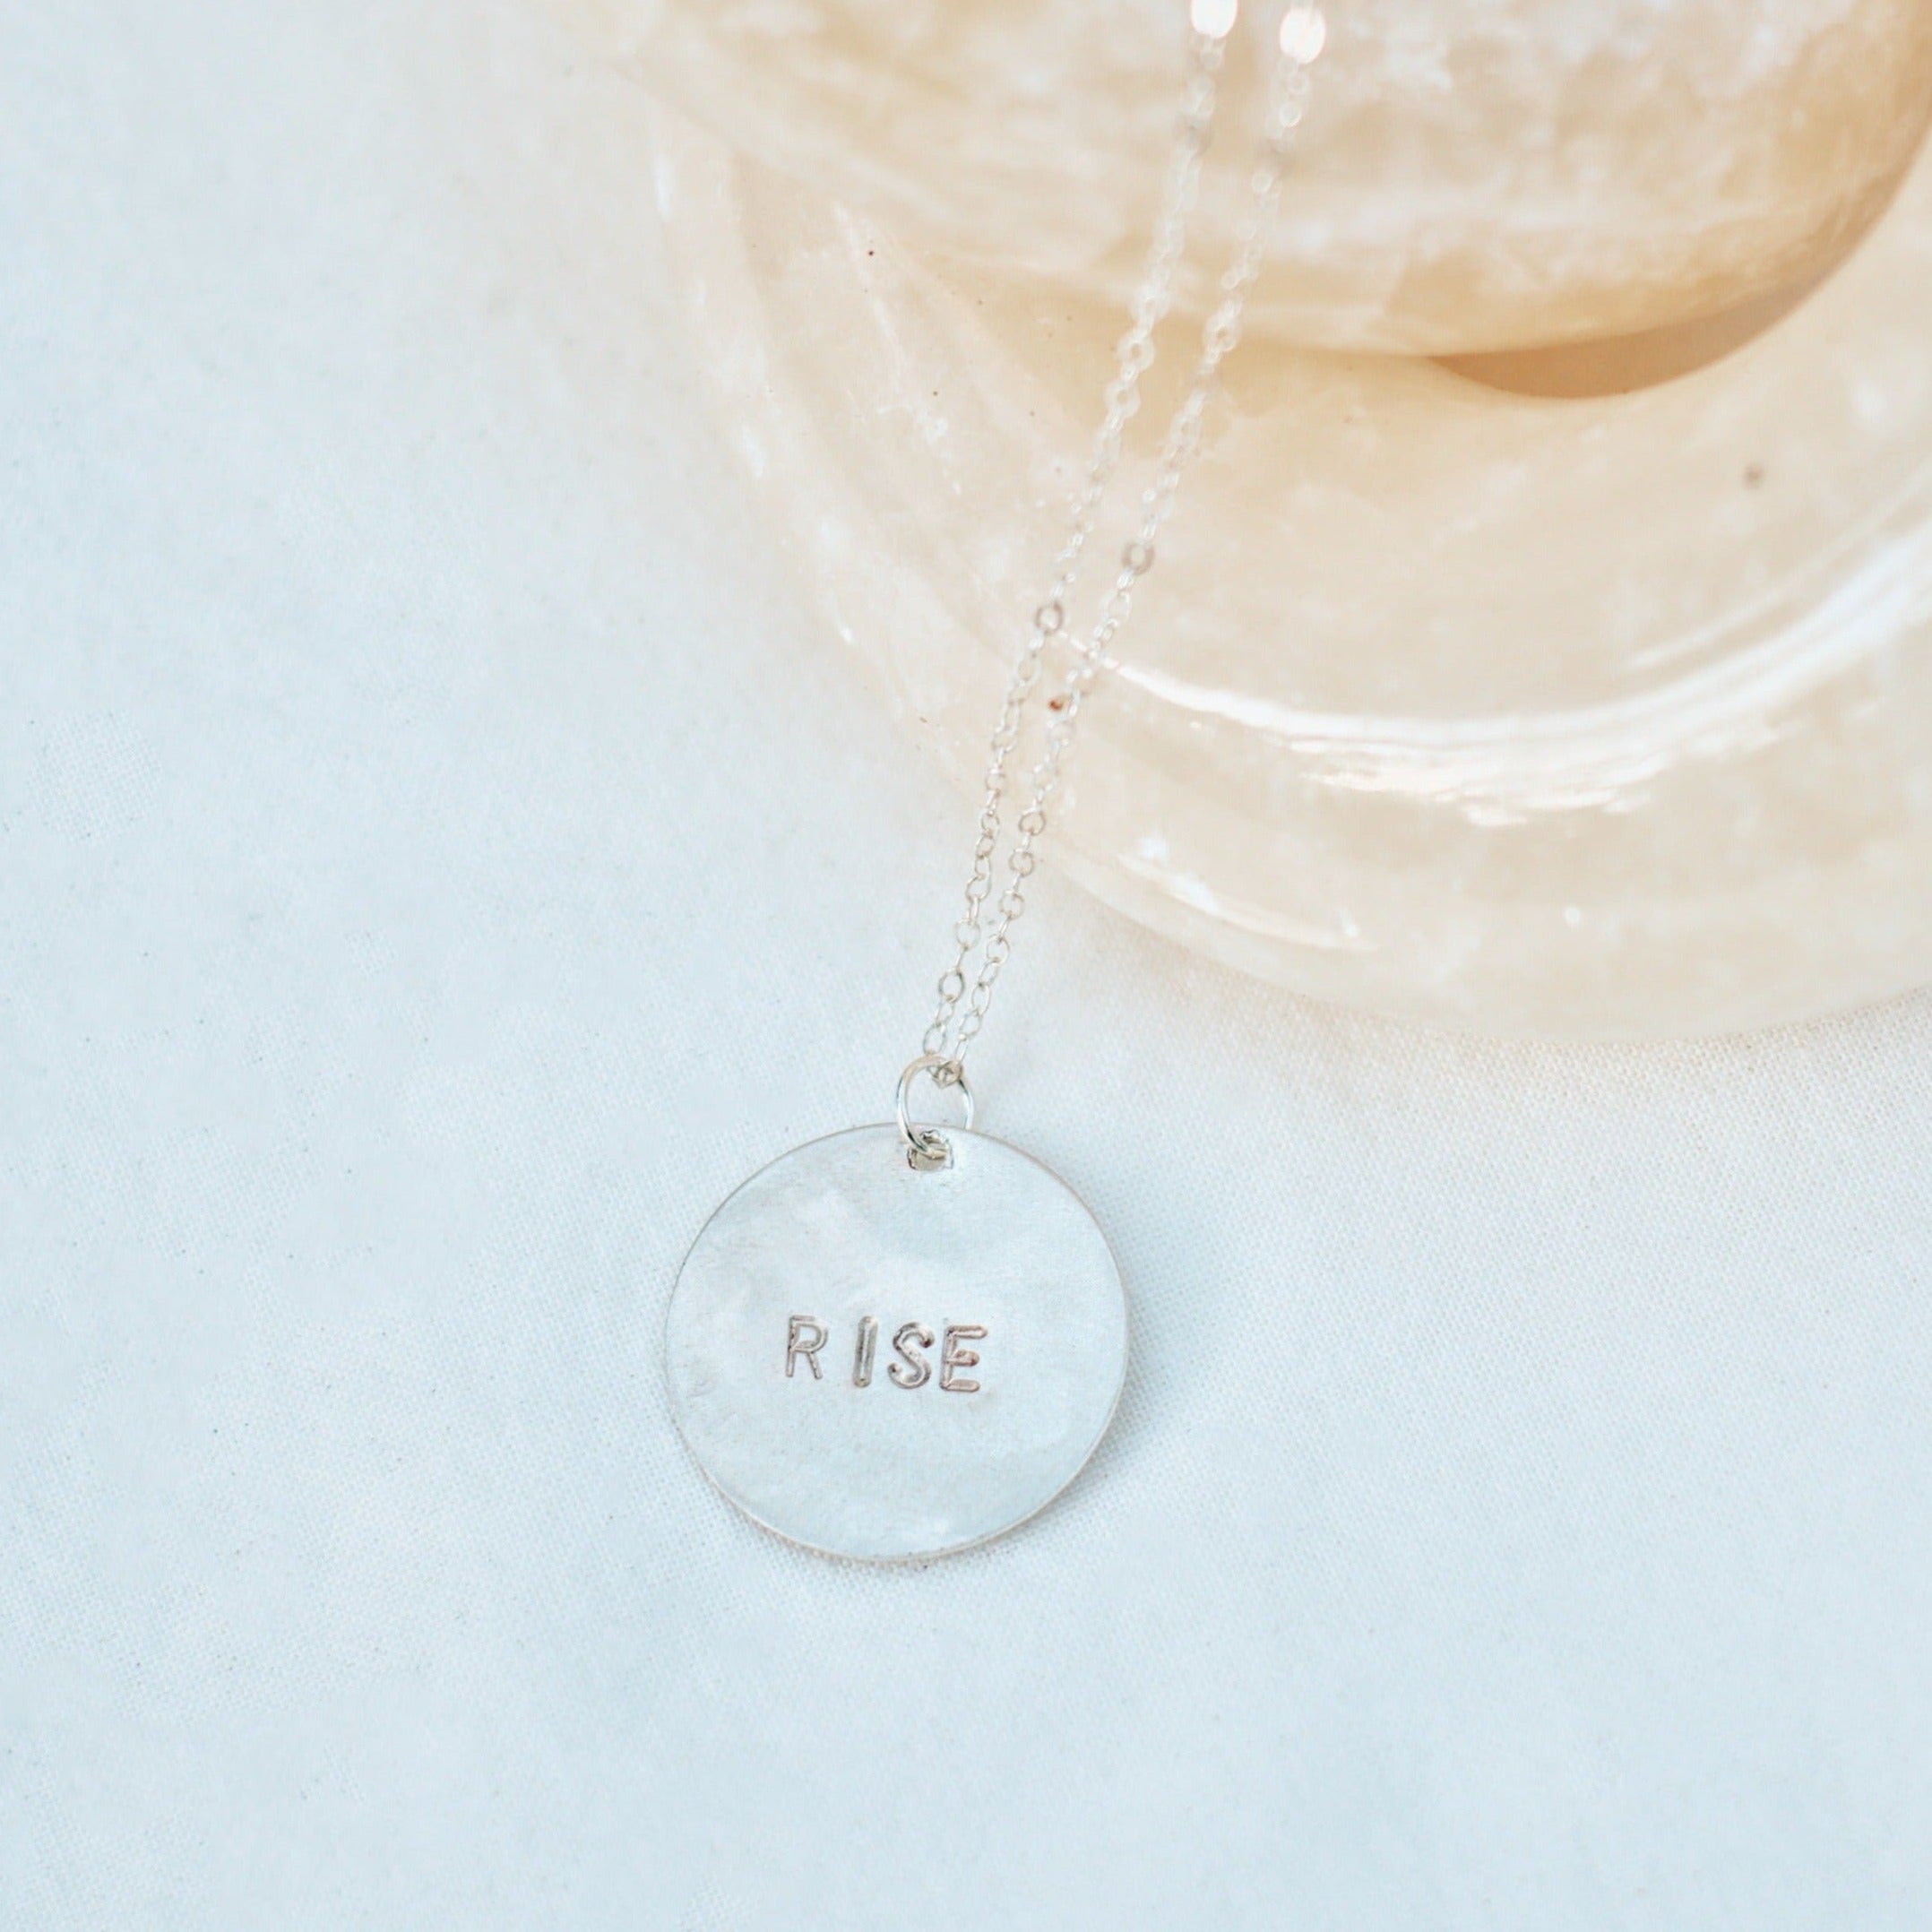 RISE Necklace (Gold-filled, Sterling Silver)